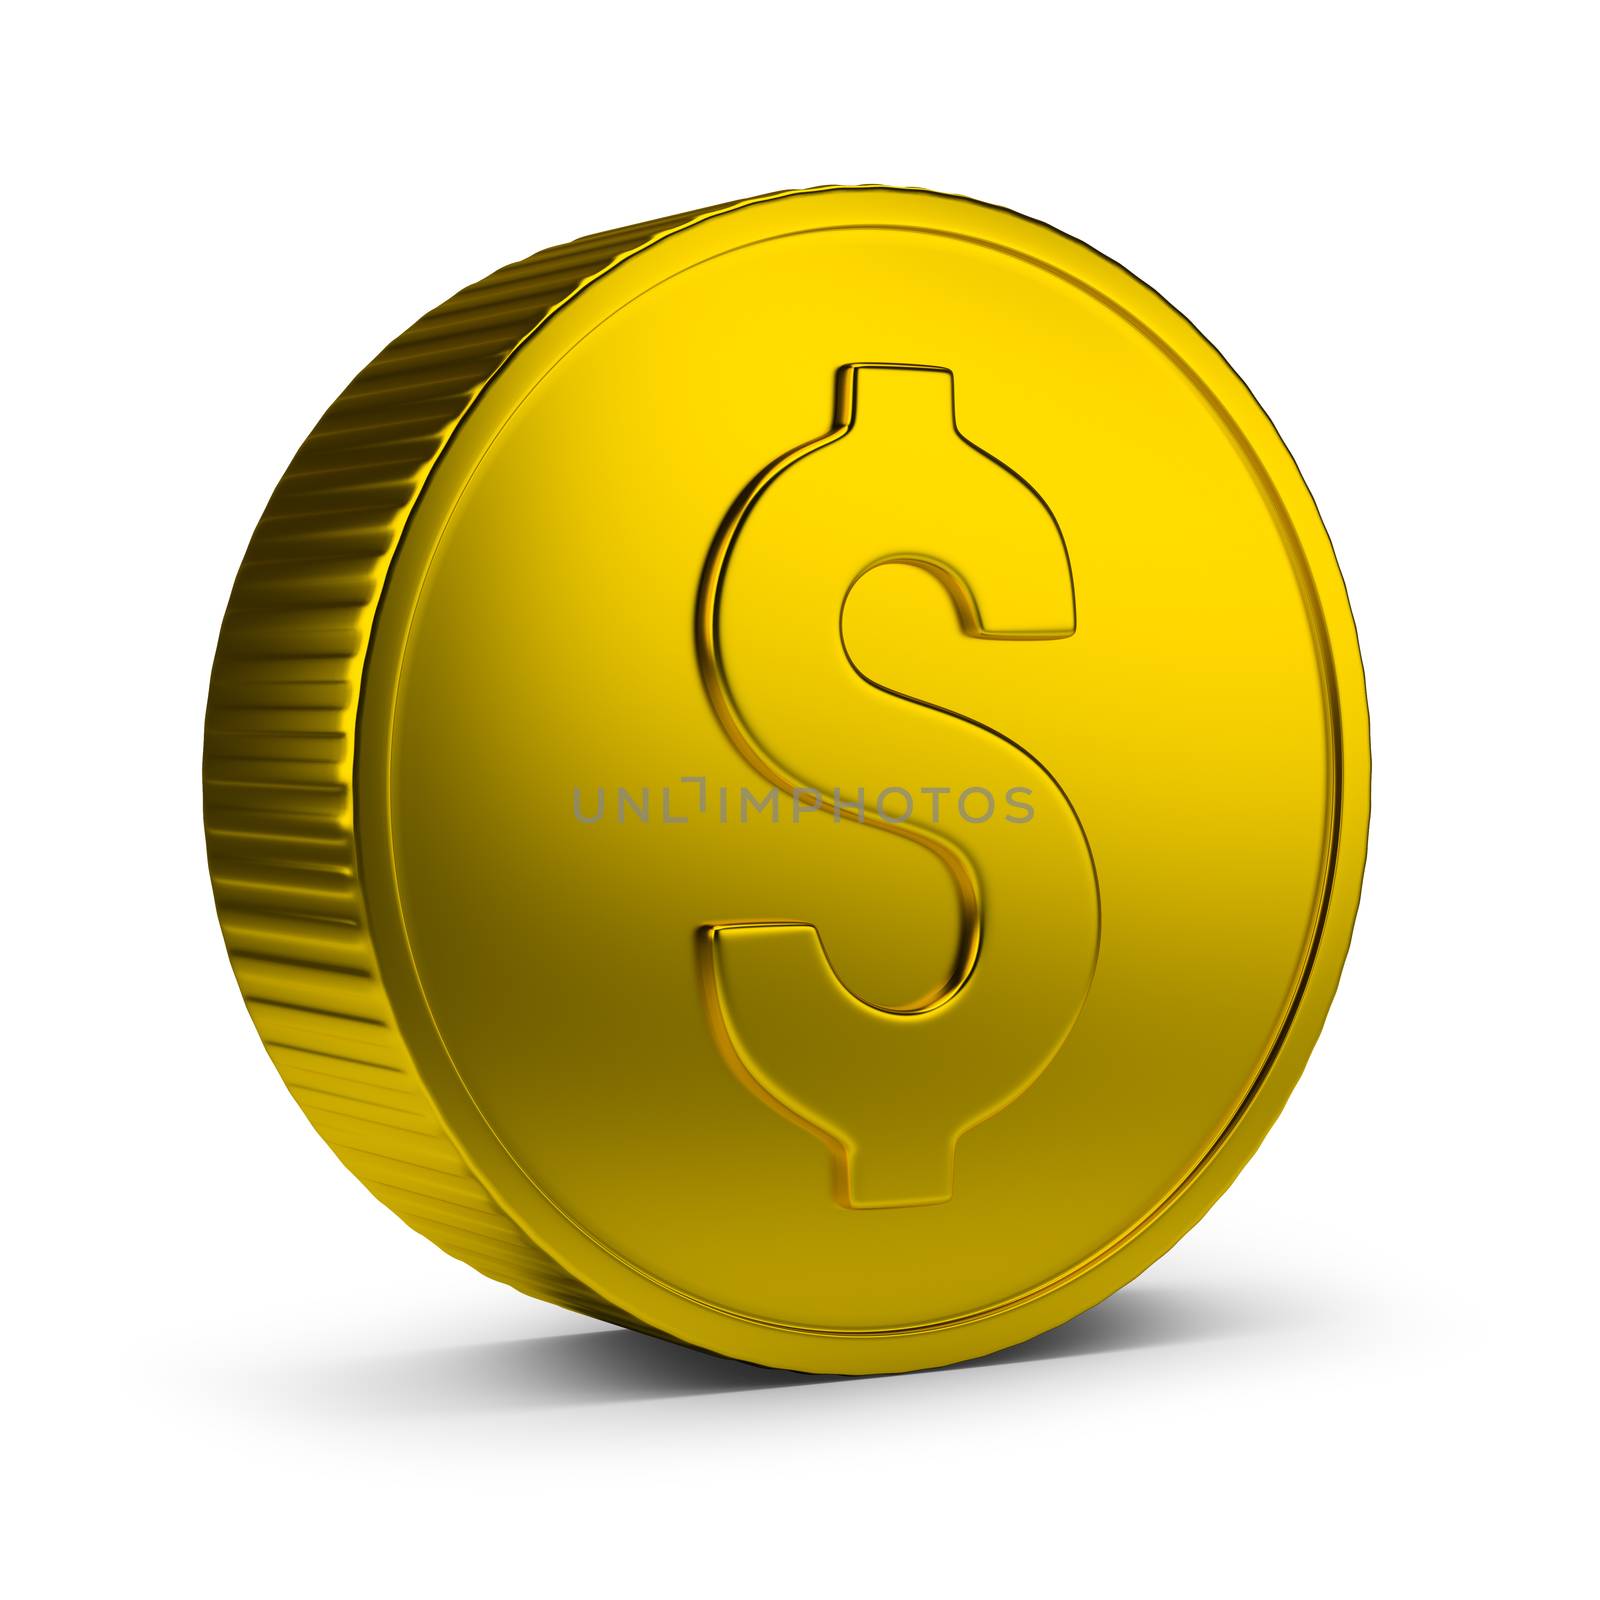 Gold coin. 3d image. Isolated white background.